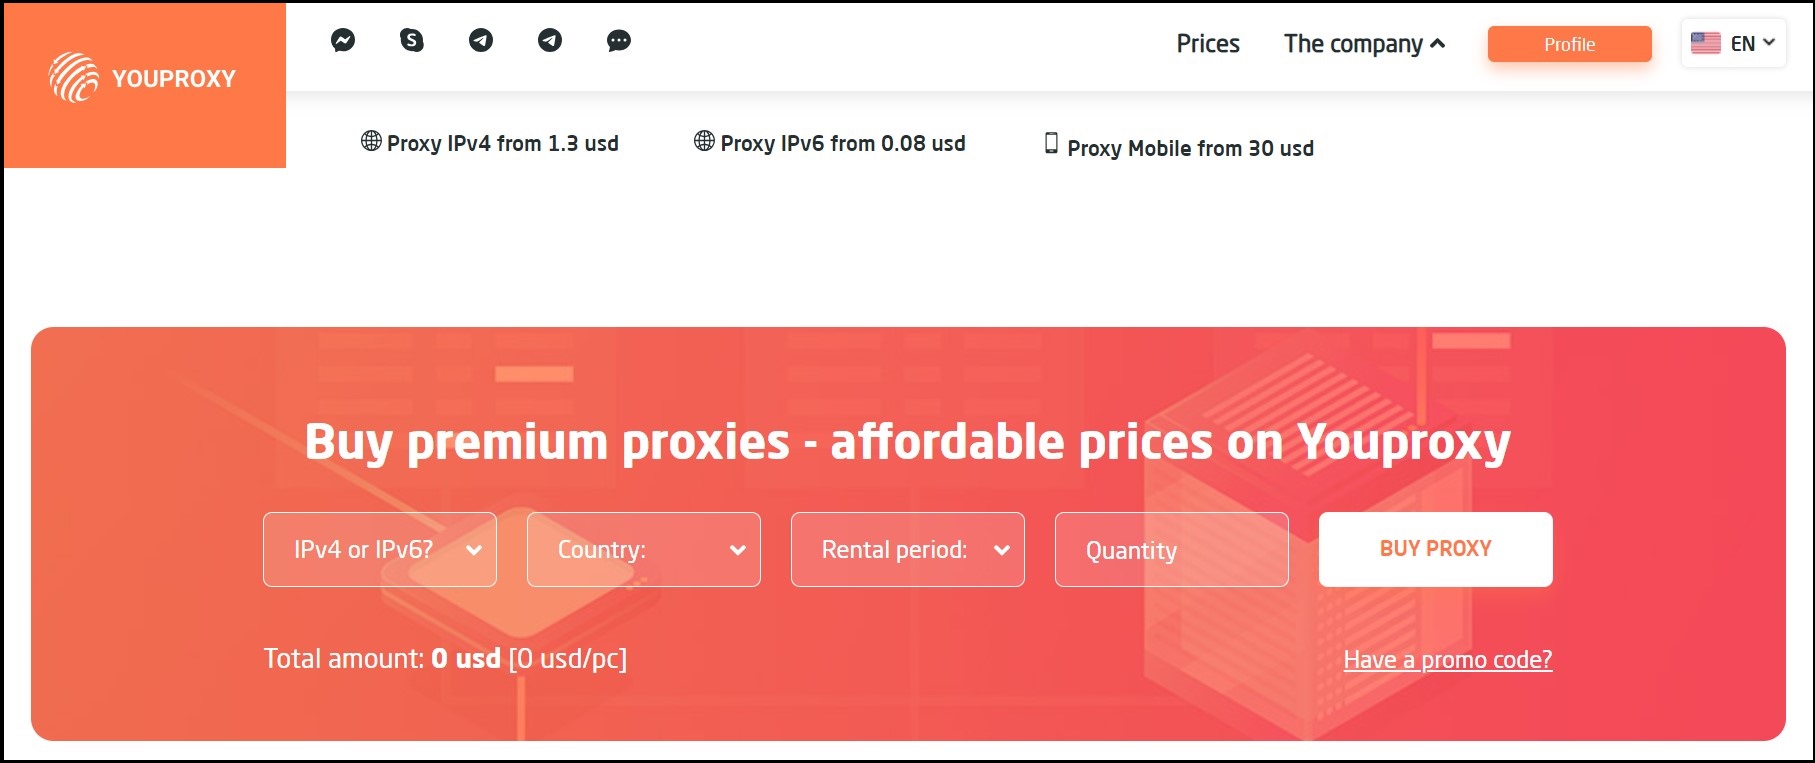 Youproxy — Best Cost Effective Dedicated Proxy With Uninterrupted Network